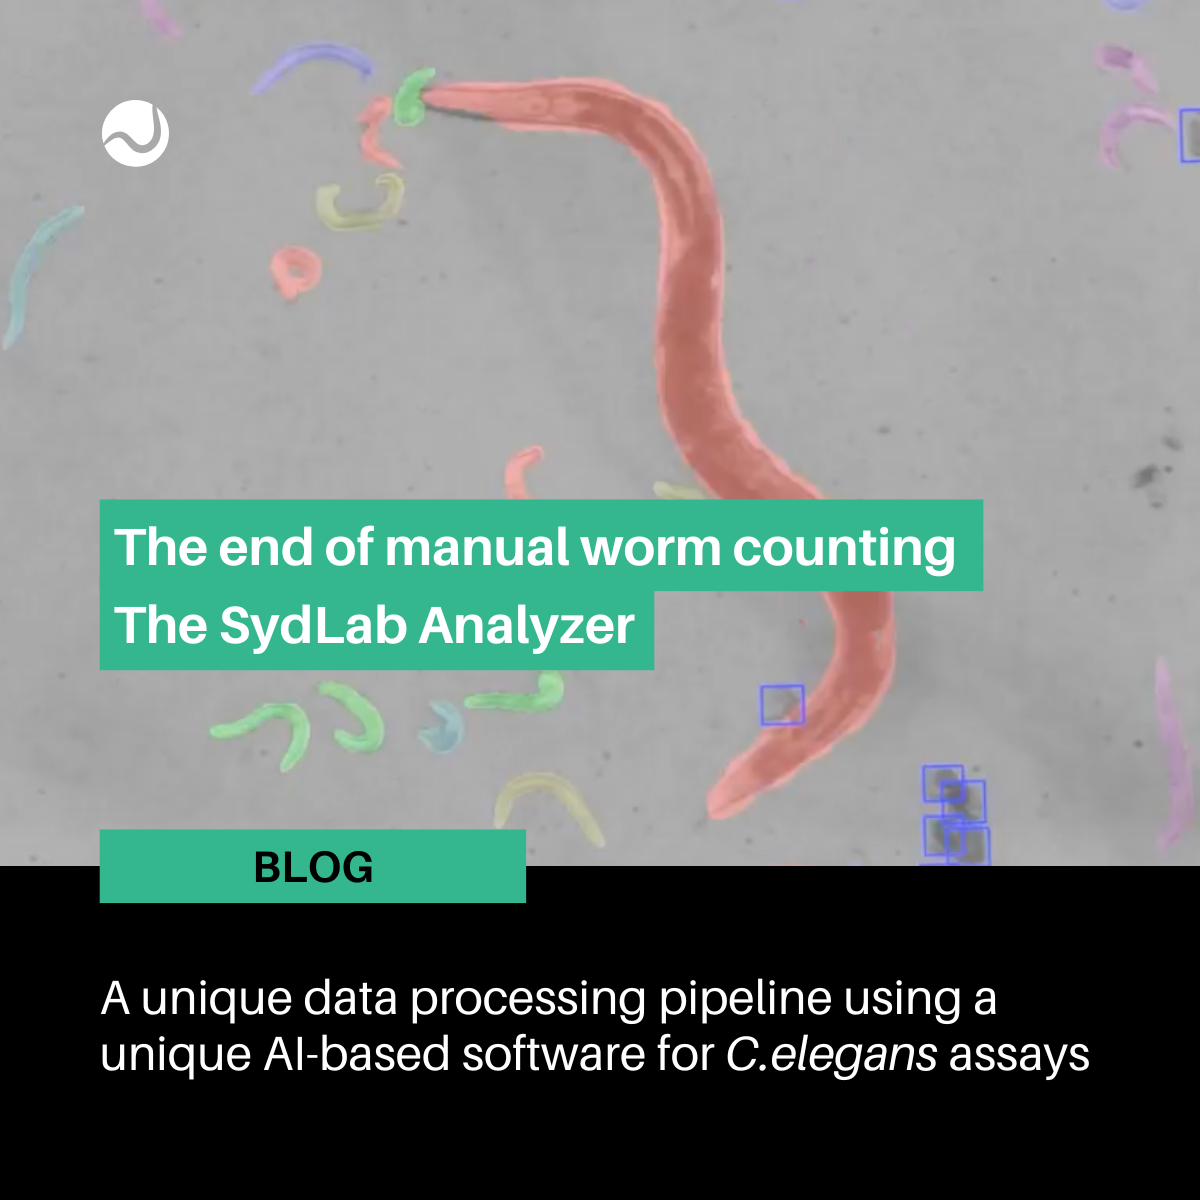 SydLab Analyzer: The end of manual worm counting